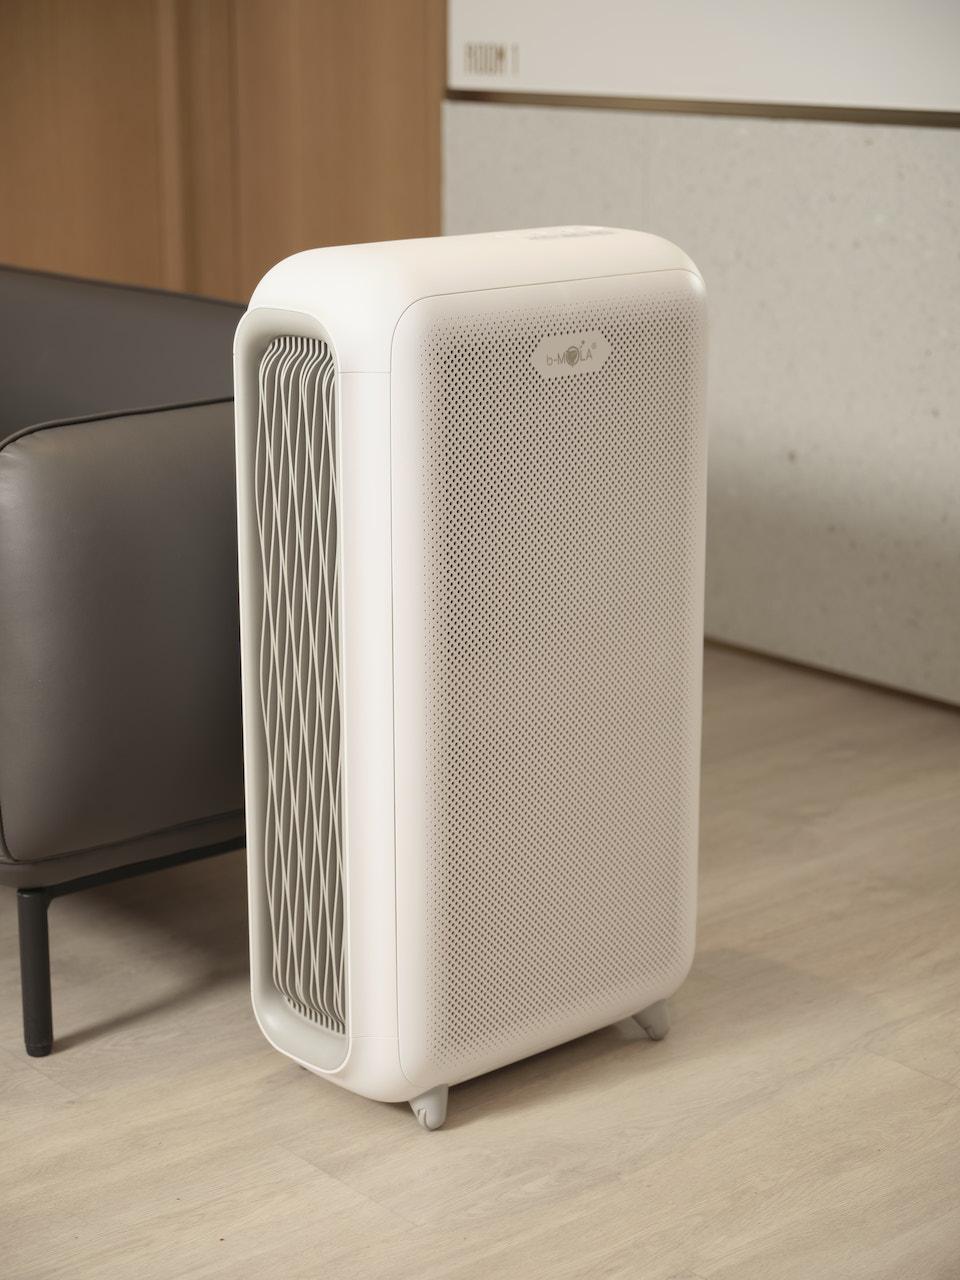 Keep Your Health In Check With B-MOLA Air Purifier